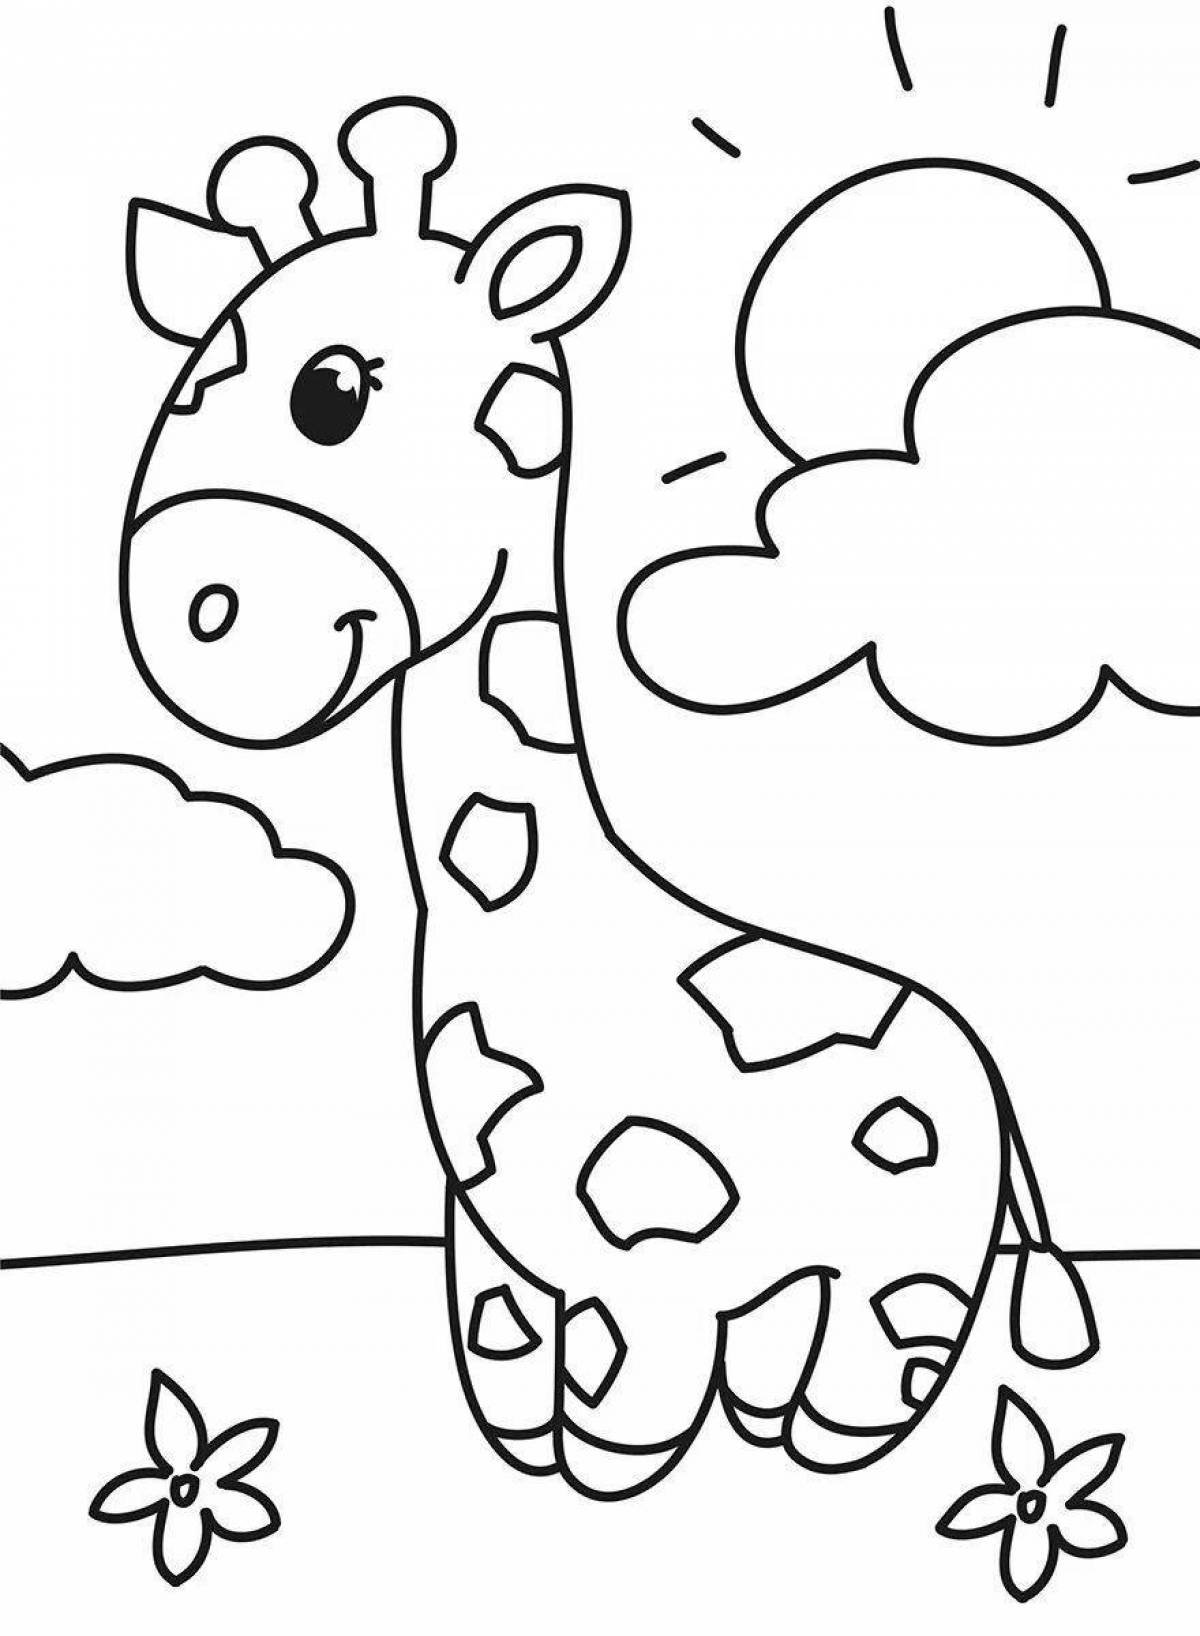 Fabulous coloring pages with large animals